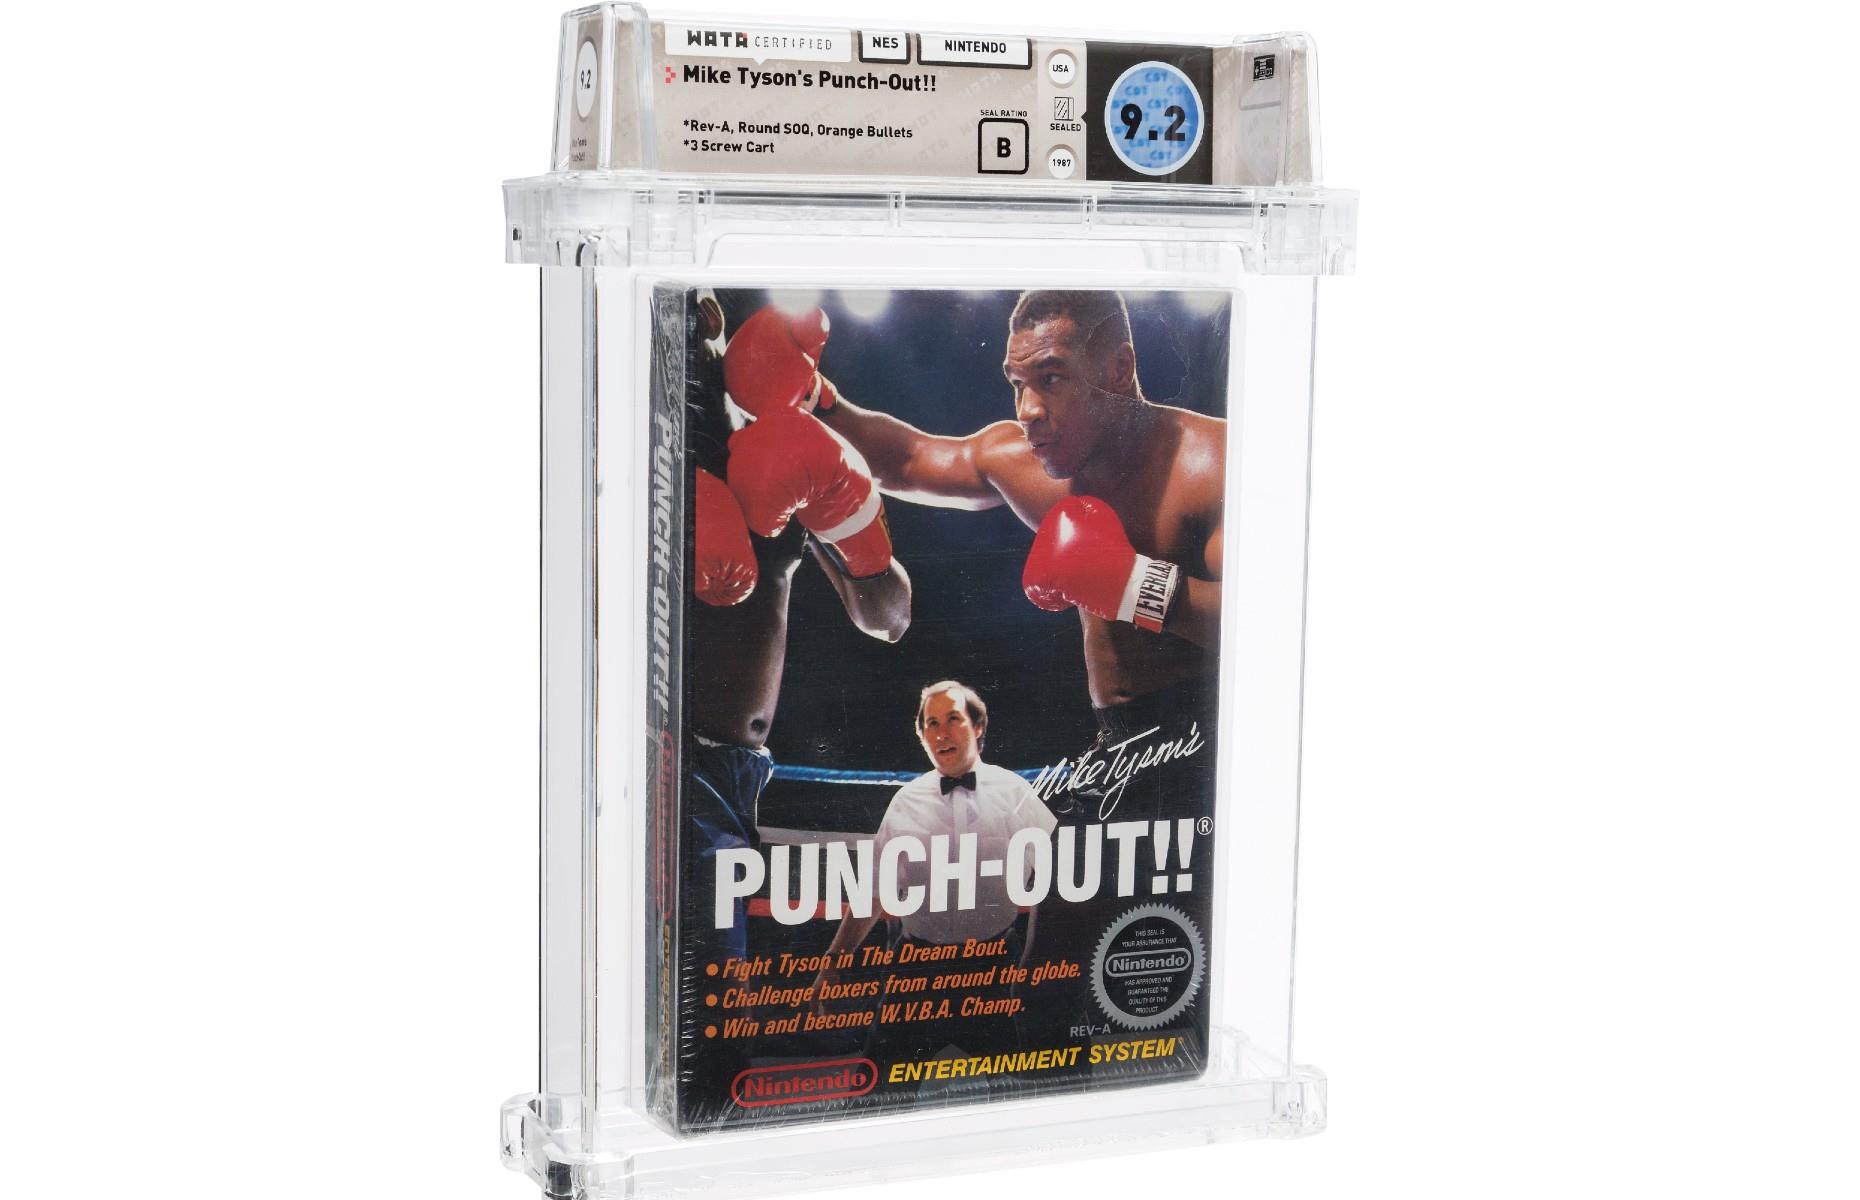 Mike Tyson’s Punch-Out!! (Nintendo) for NES, 1987: up to $50,400 (£39.2k)